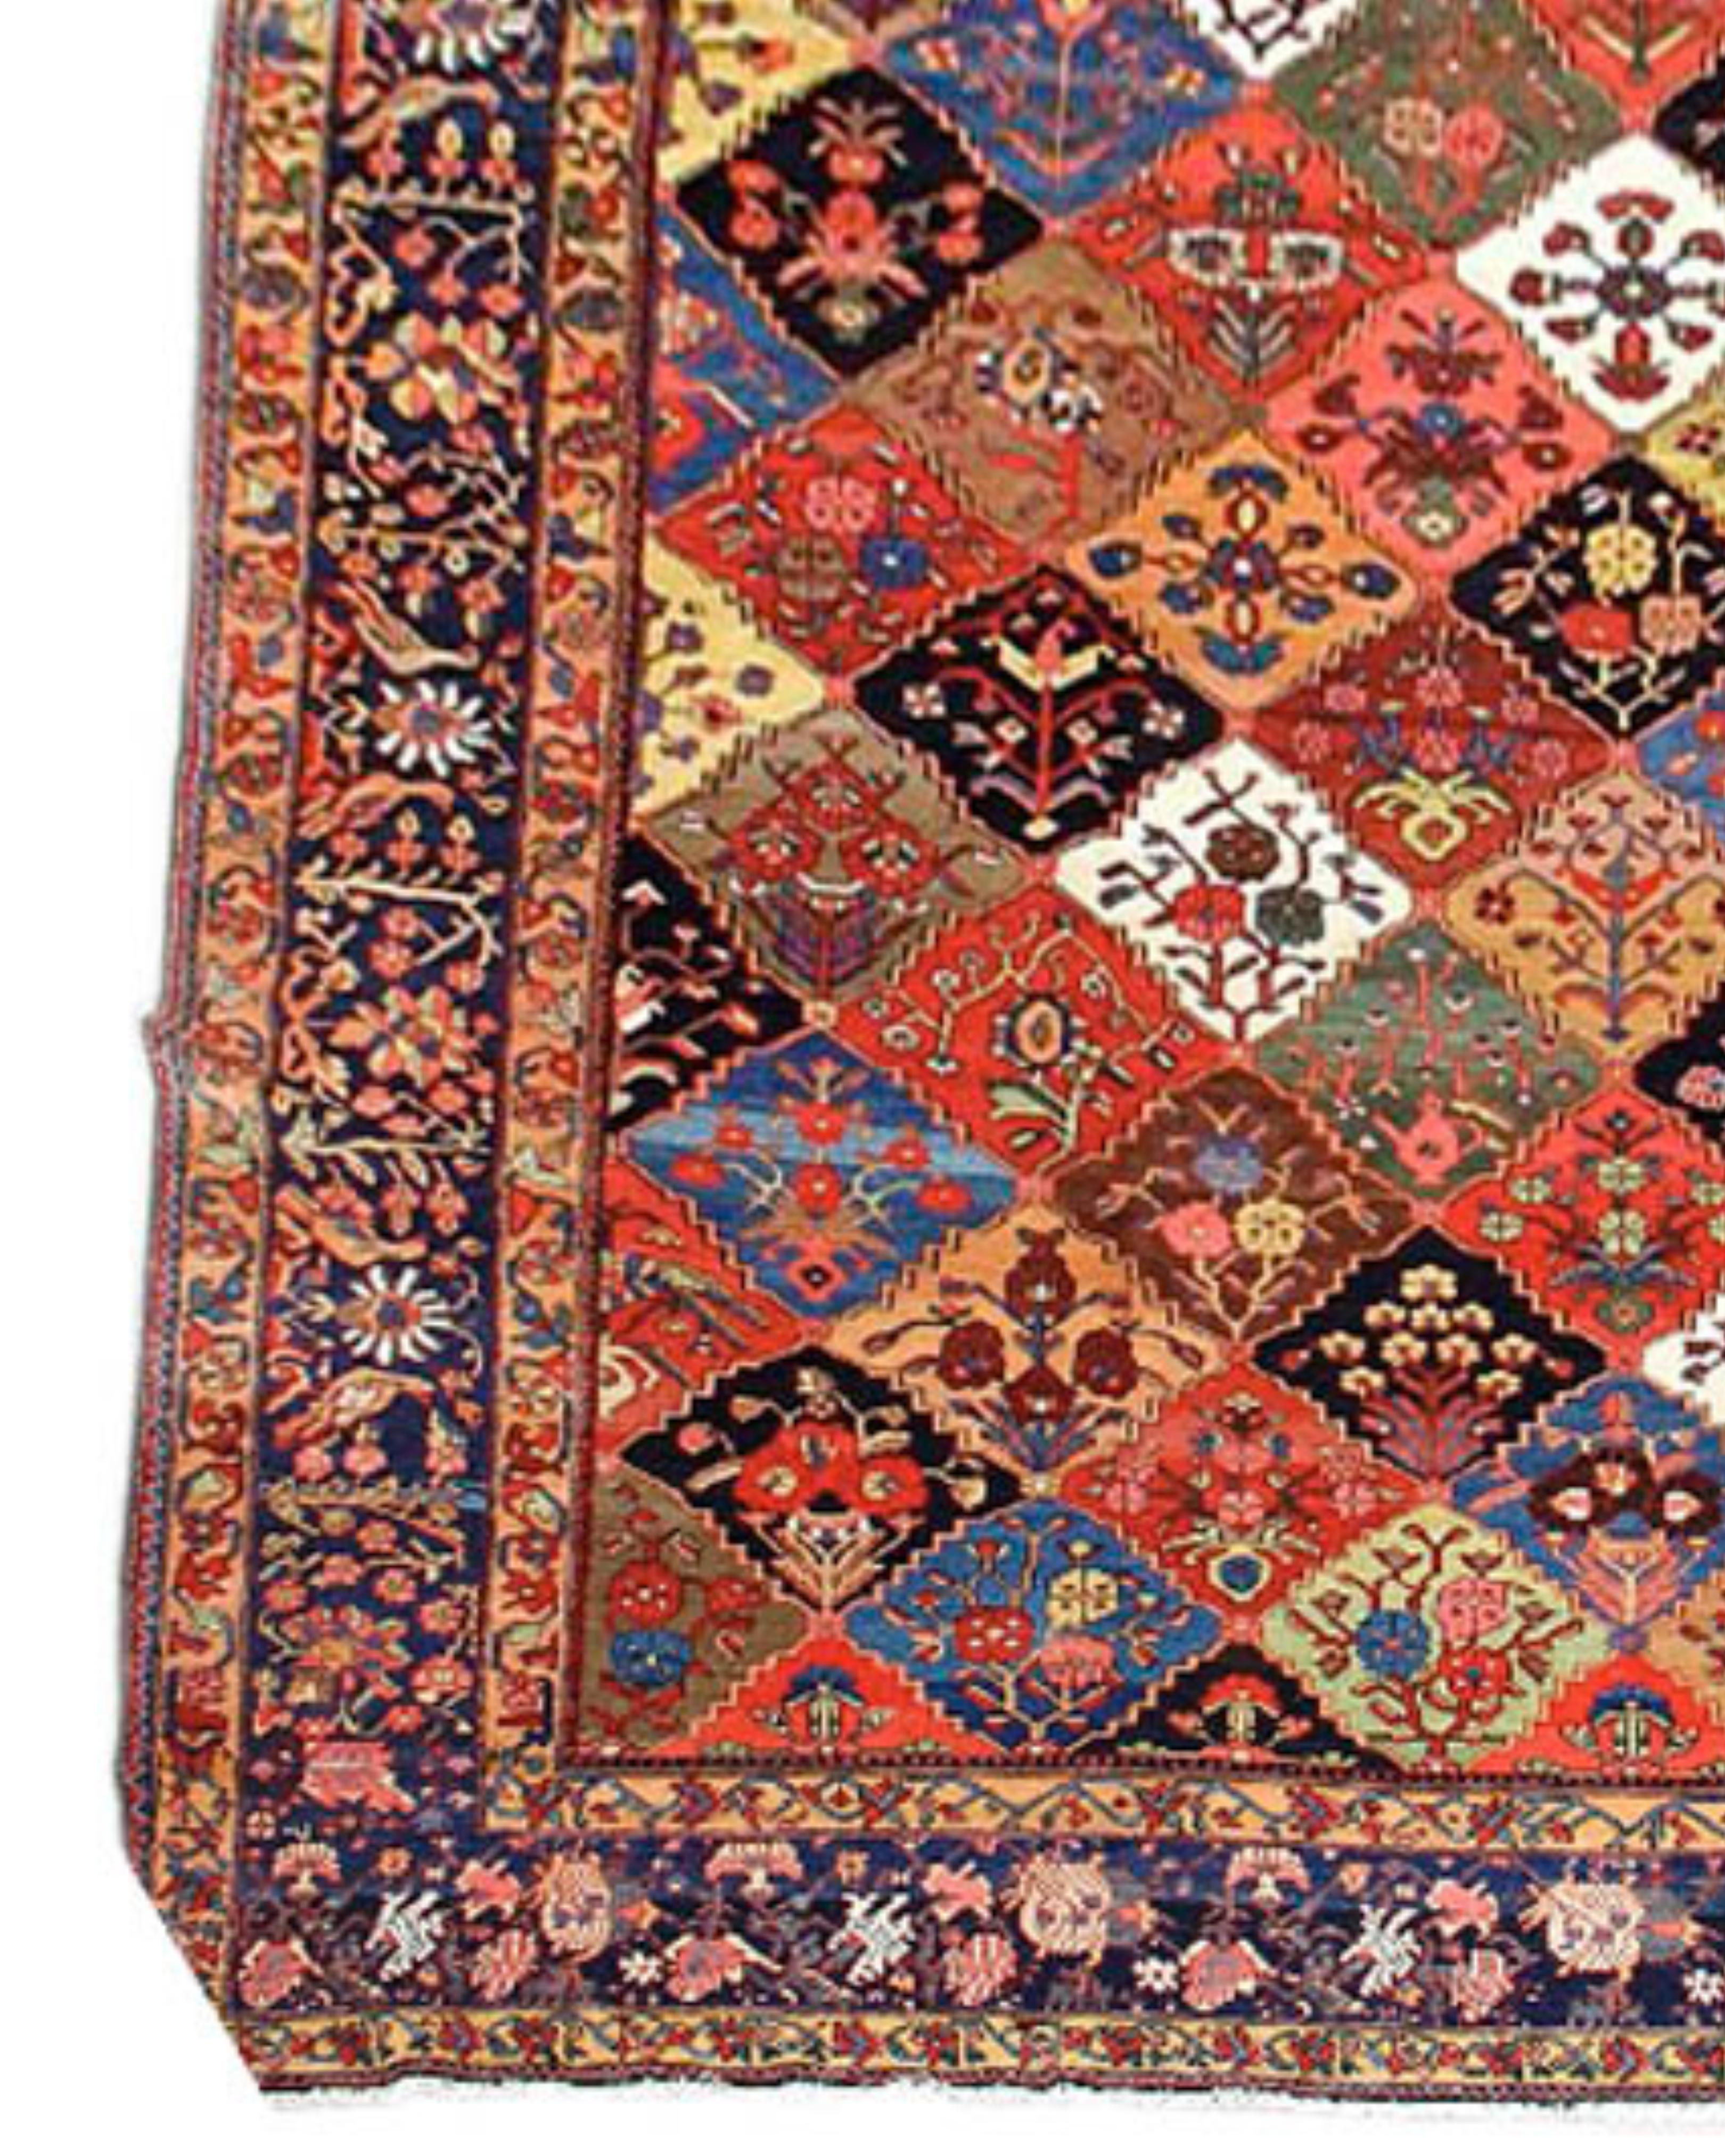 Hand-Knotted Antique Oversized Persian Bakhtiari Carpet, Early 20th Century For Sale